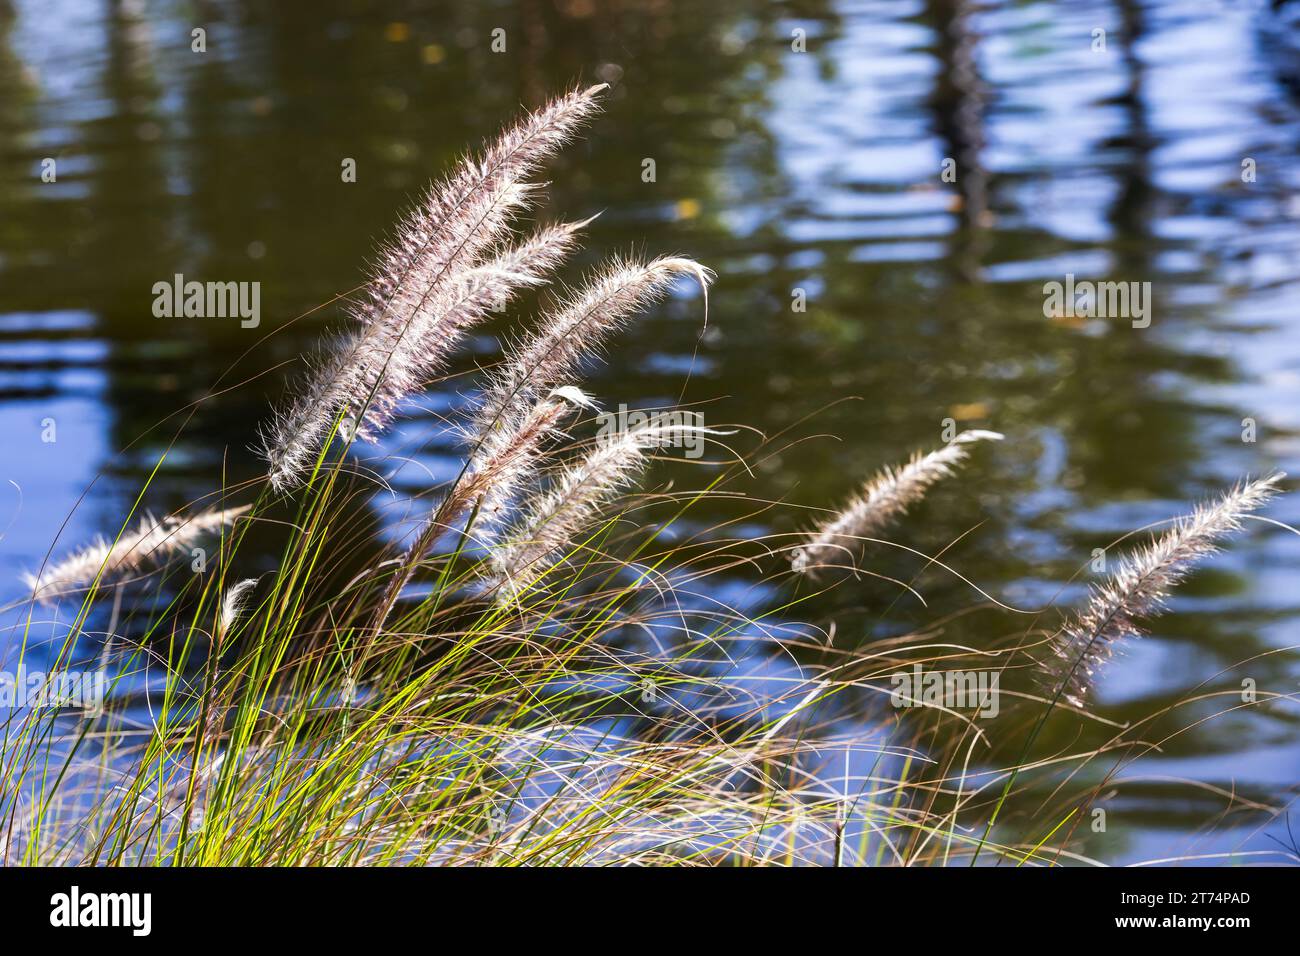 Natural background with coastal grass and lake water. Cenchrus setaceus, commonly known as crimson fountaingrass Stock Photo